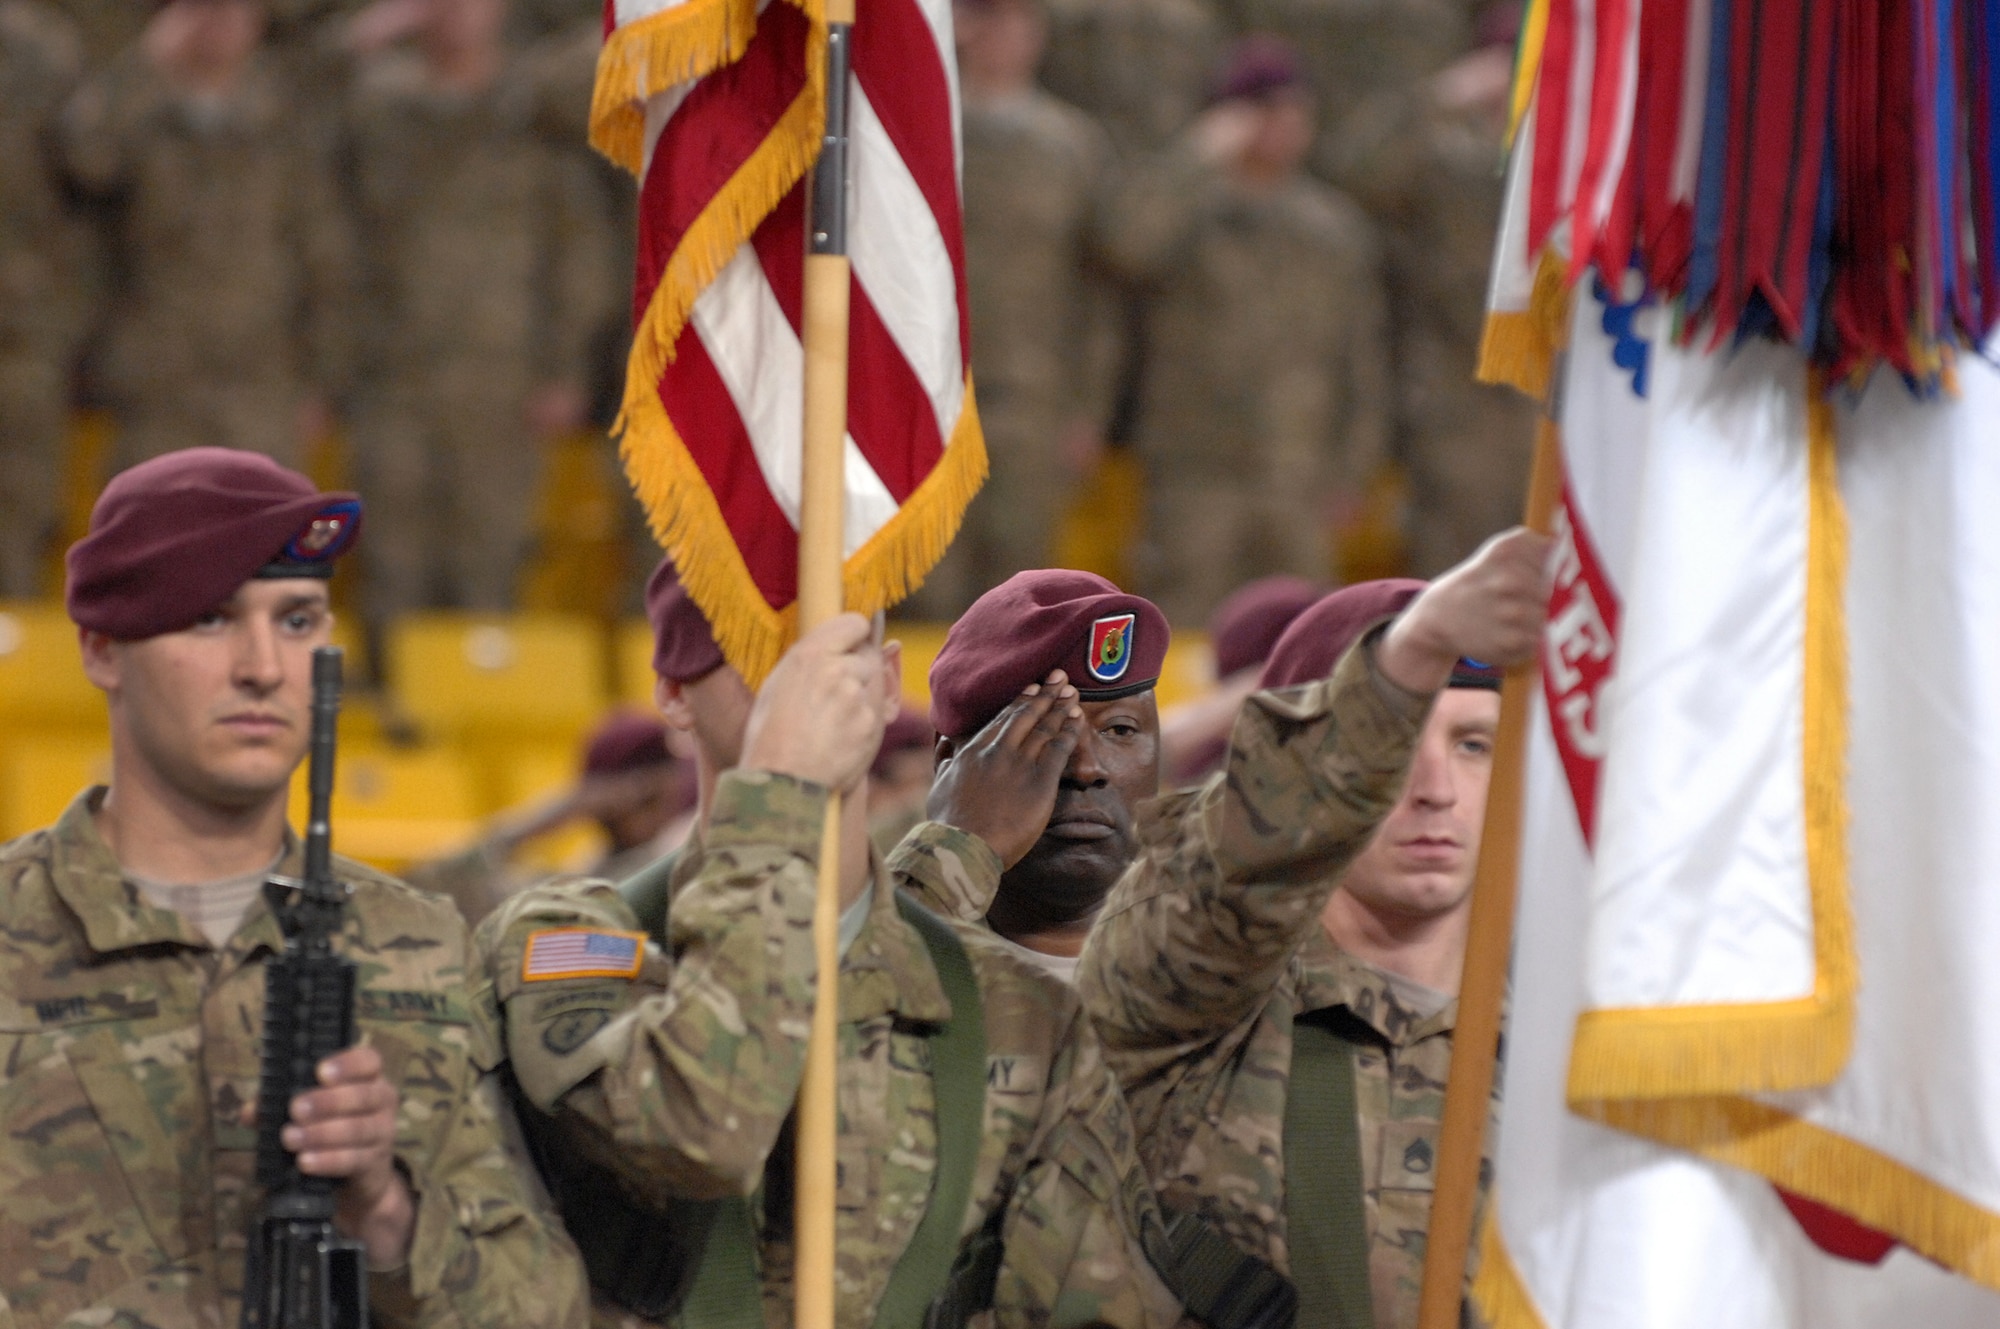 Command Sgt. Maj. Terry Gardner, 4th Brigade Combat Team (Airborne), 25th Infantry Division, salutes during the playing of the national anthem during the 4-25th ABCT's deployment ceremony at Sullivan Arena, Anchorage, Alaska, Nov. 29, 2011.  The 4-25th ABCT, "Spartan Brigade," will deploy 3,500 Soldiers on a series of flights in November and December en route to Afghanistan. (U.S. Air Force photo/Staff Sgt. Zachary Wolf)